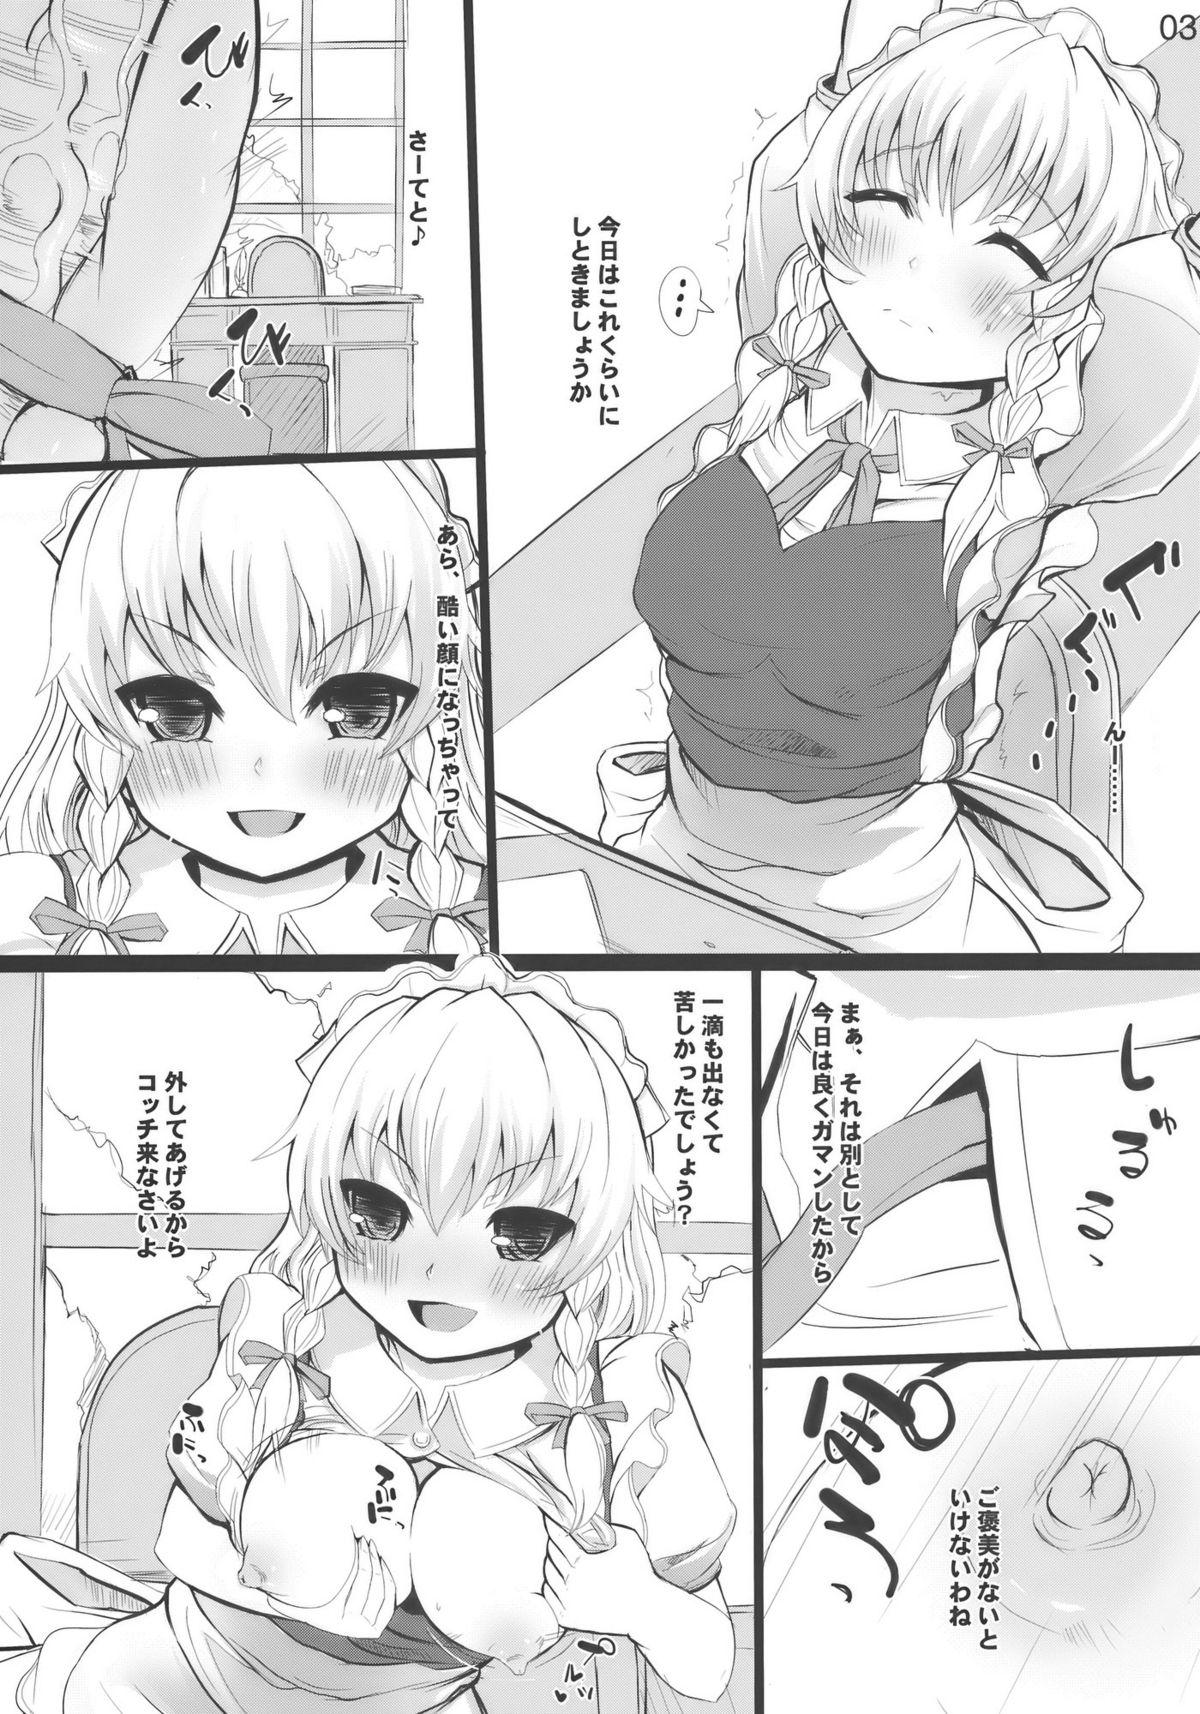 Reverse Feed me with your Kiss - Touhou project Arabic - Page 3